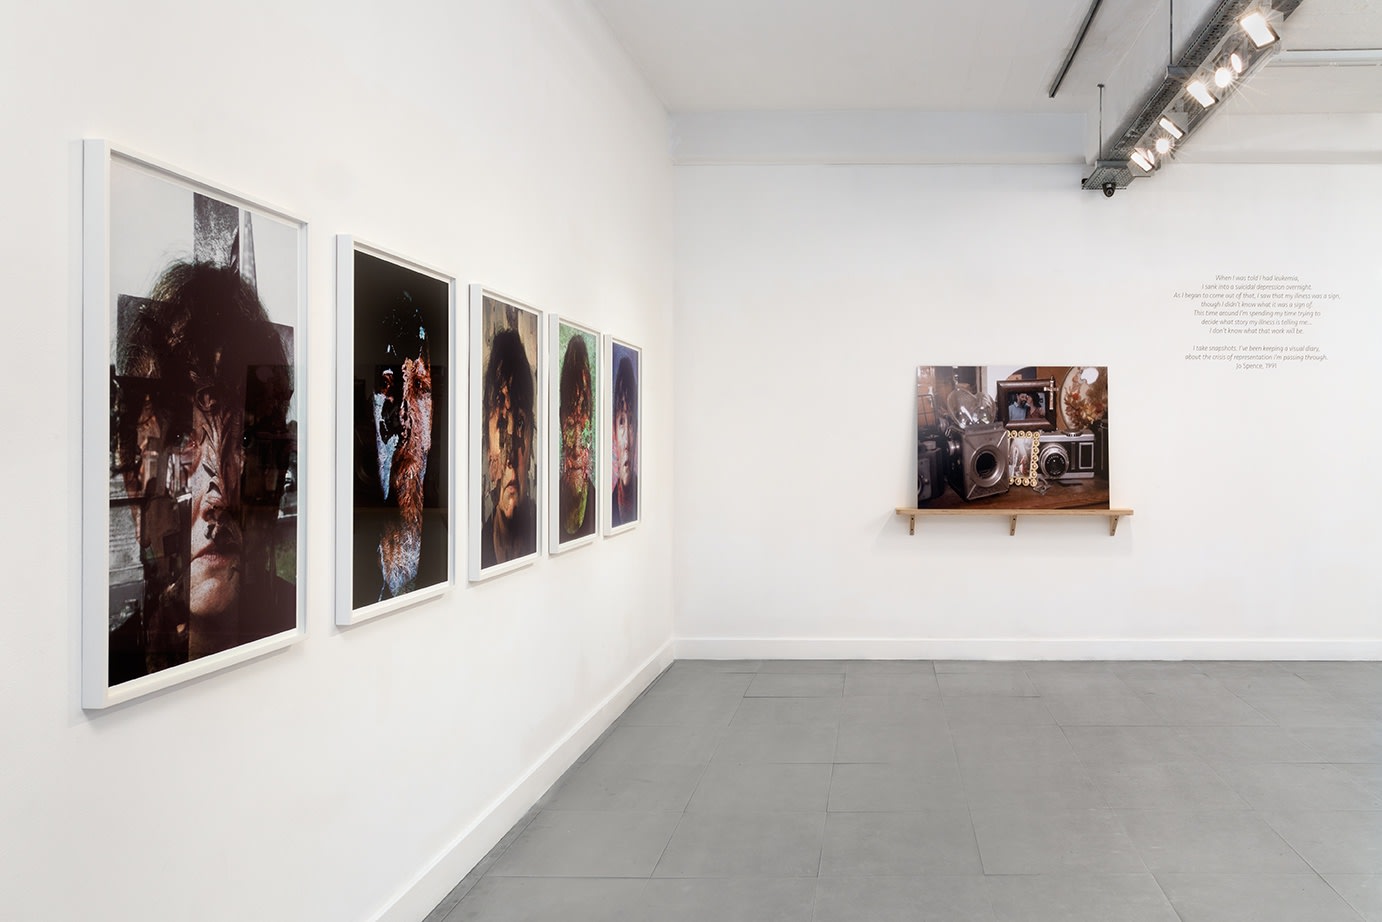 Installation view at Richard Saltoun Gallery: Jo Spence: The Final Project (11 February - 25 March 2016)